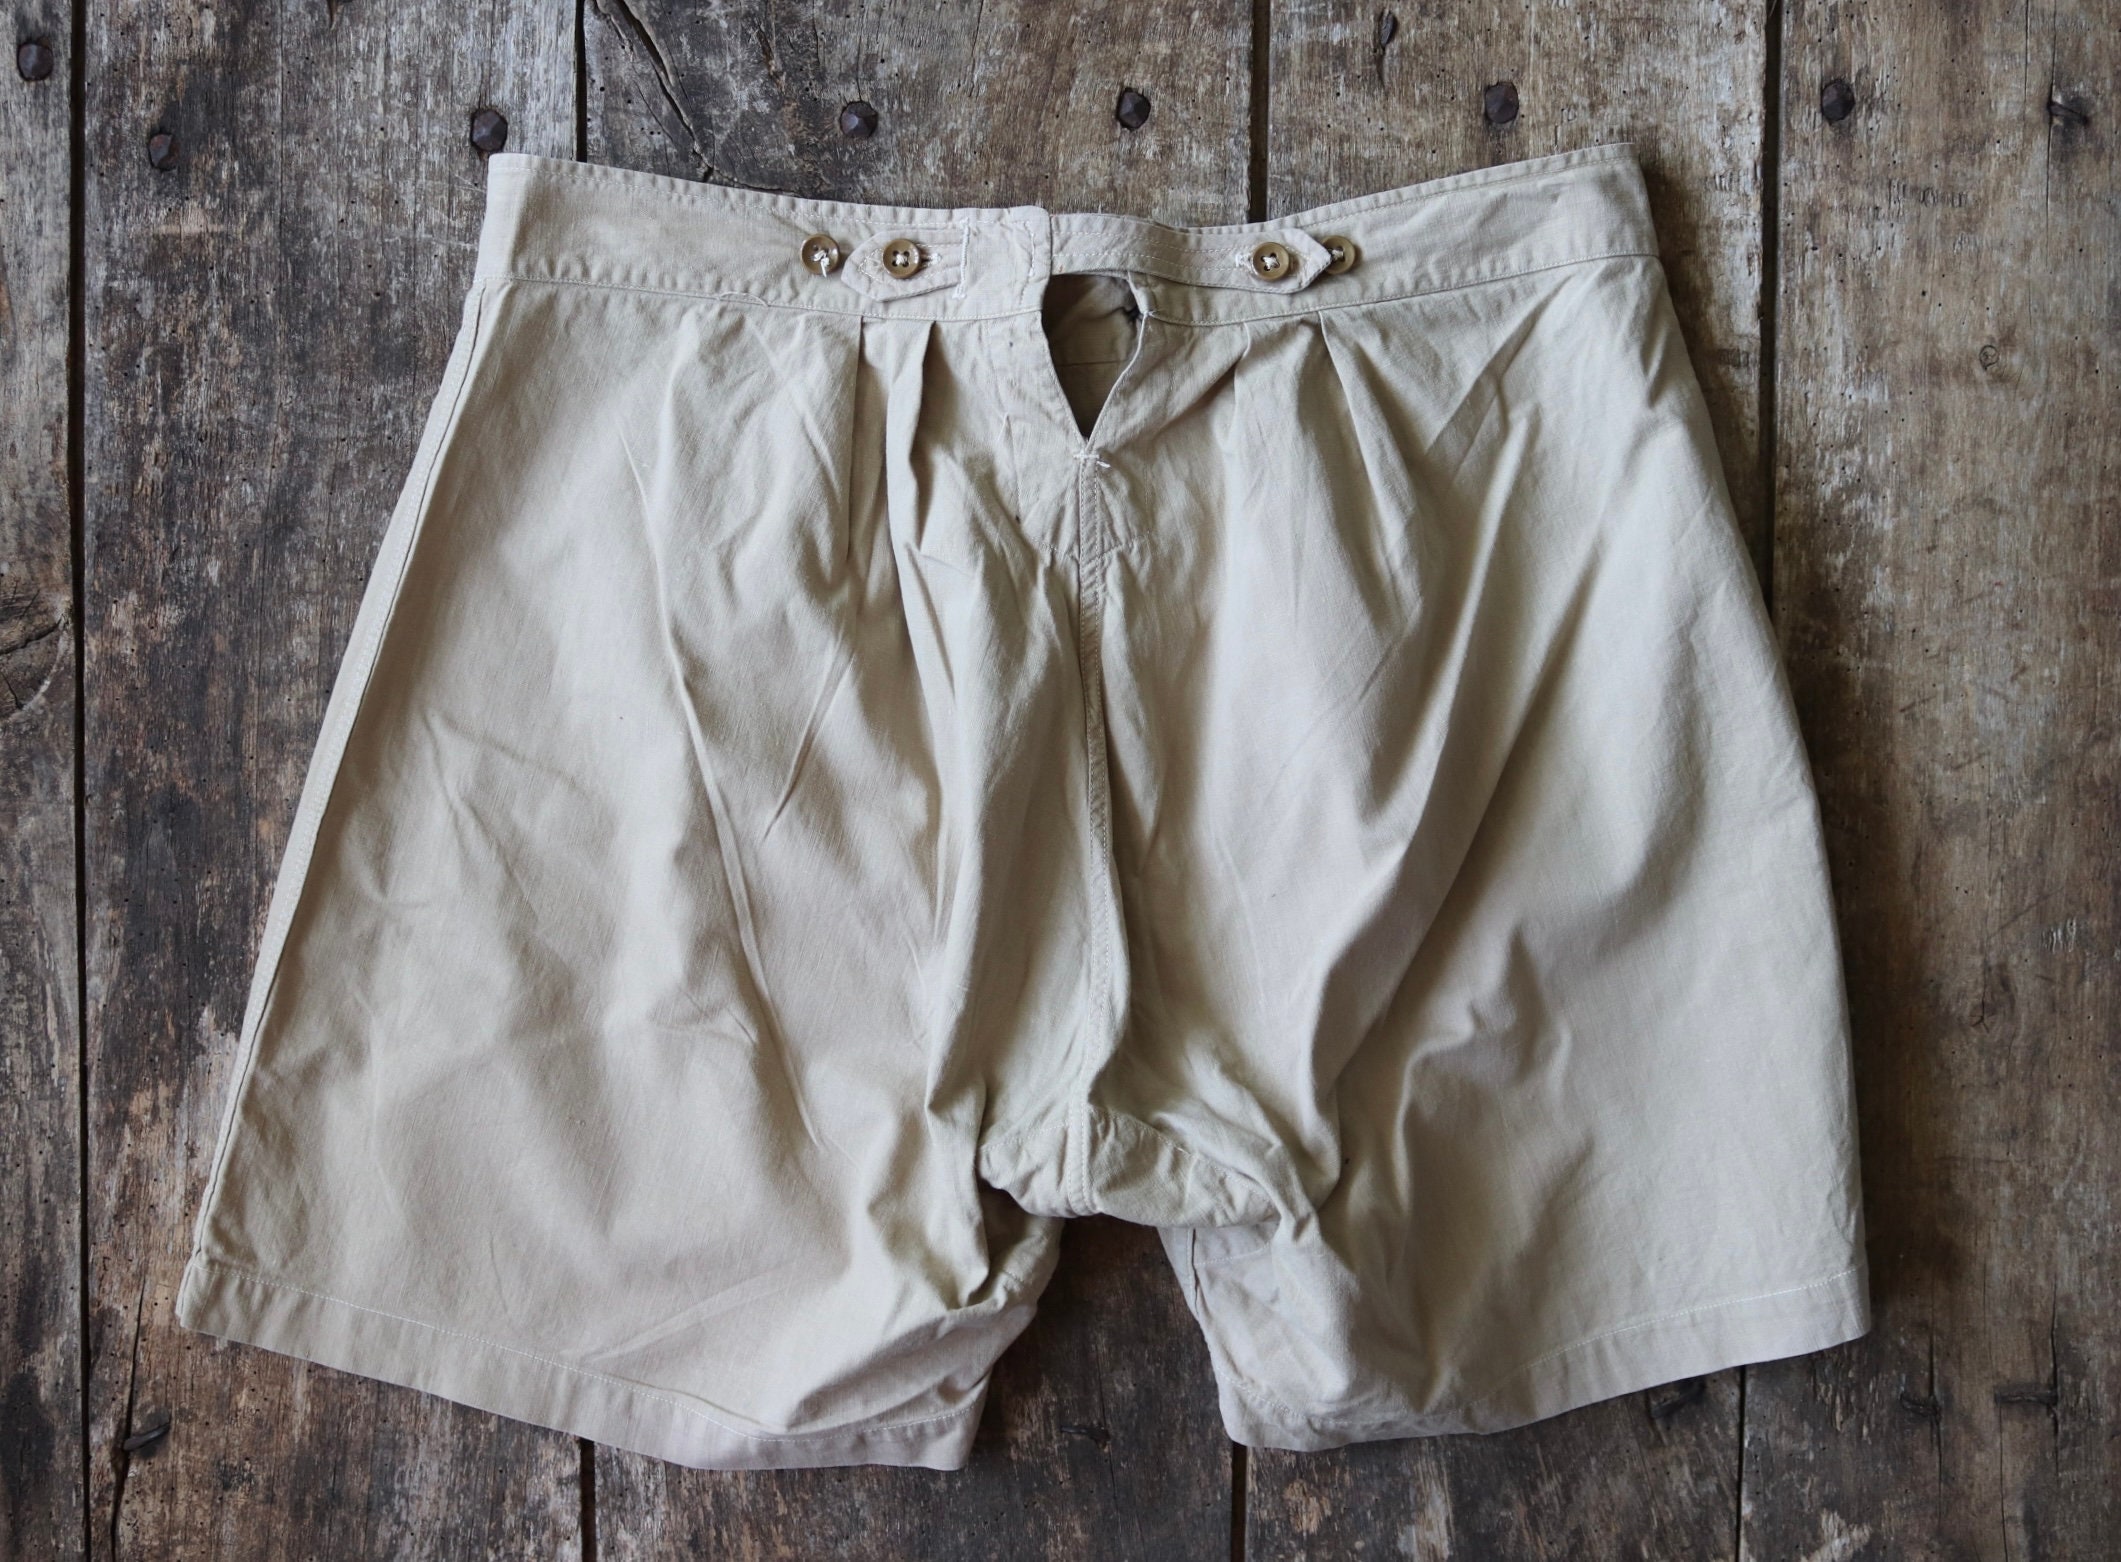 Vintage 1940s 40s 1950s 50s french army military white cotton boxer shorts  underwear pants 30 31 waist (1)